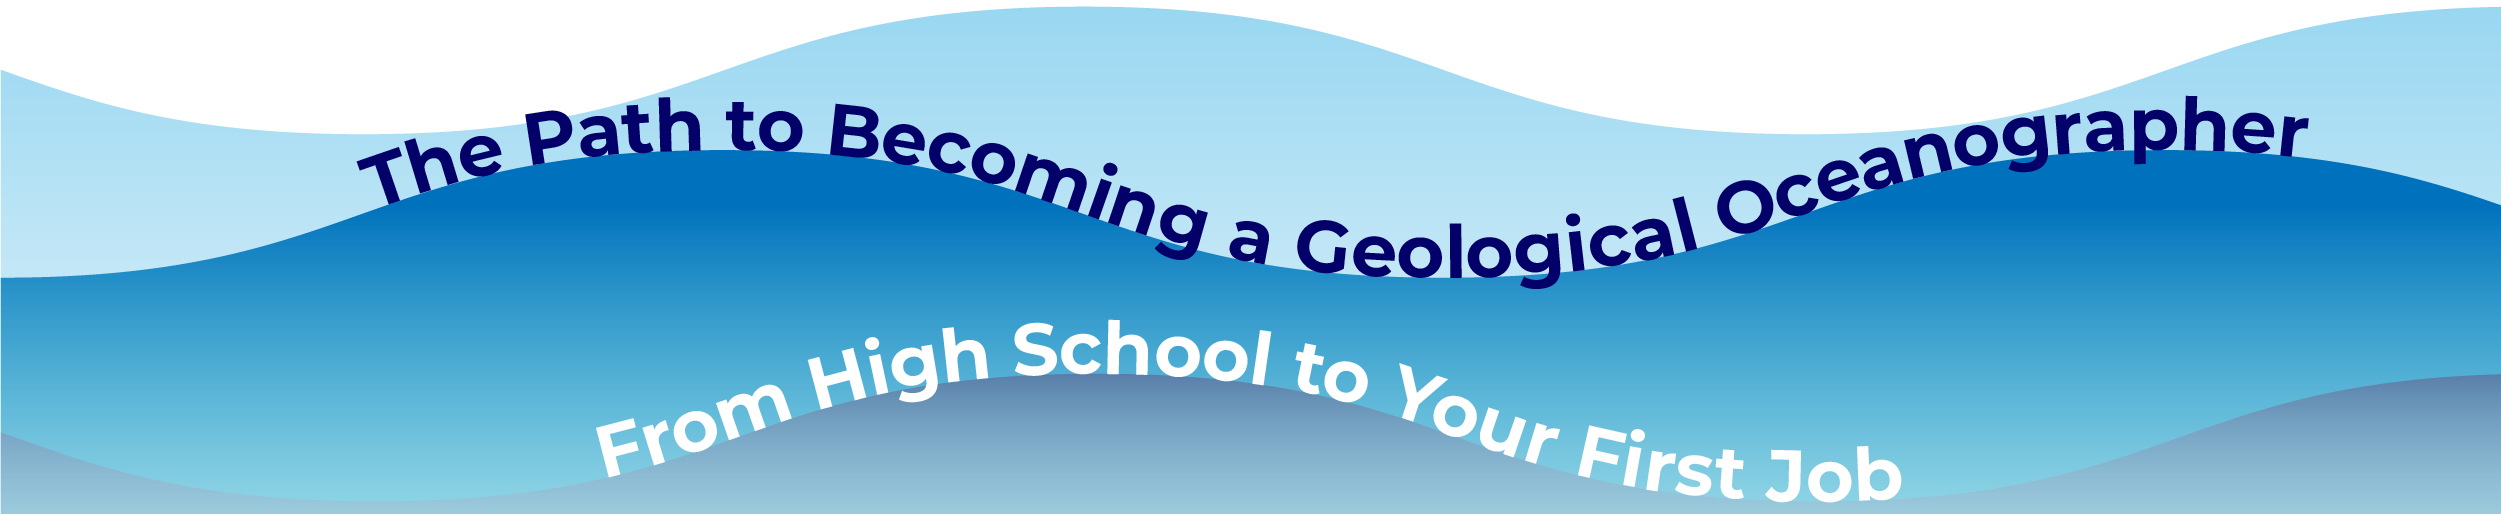 The path to becoming a Geological Oceanographer